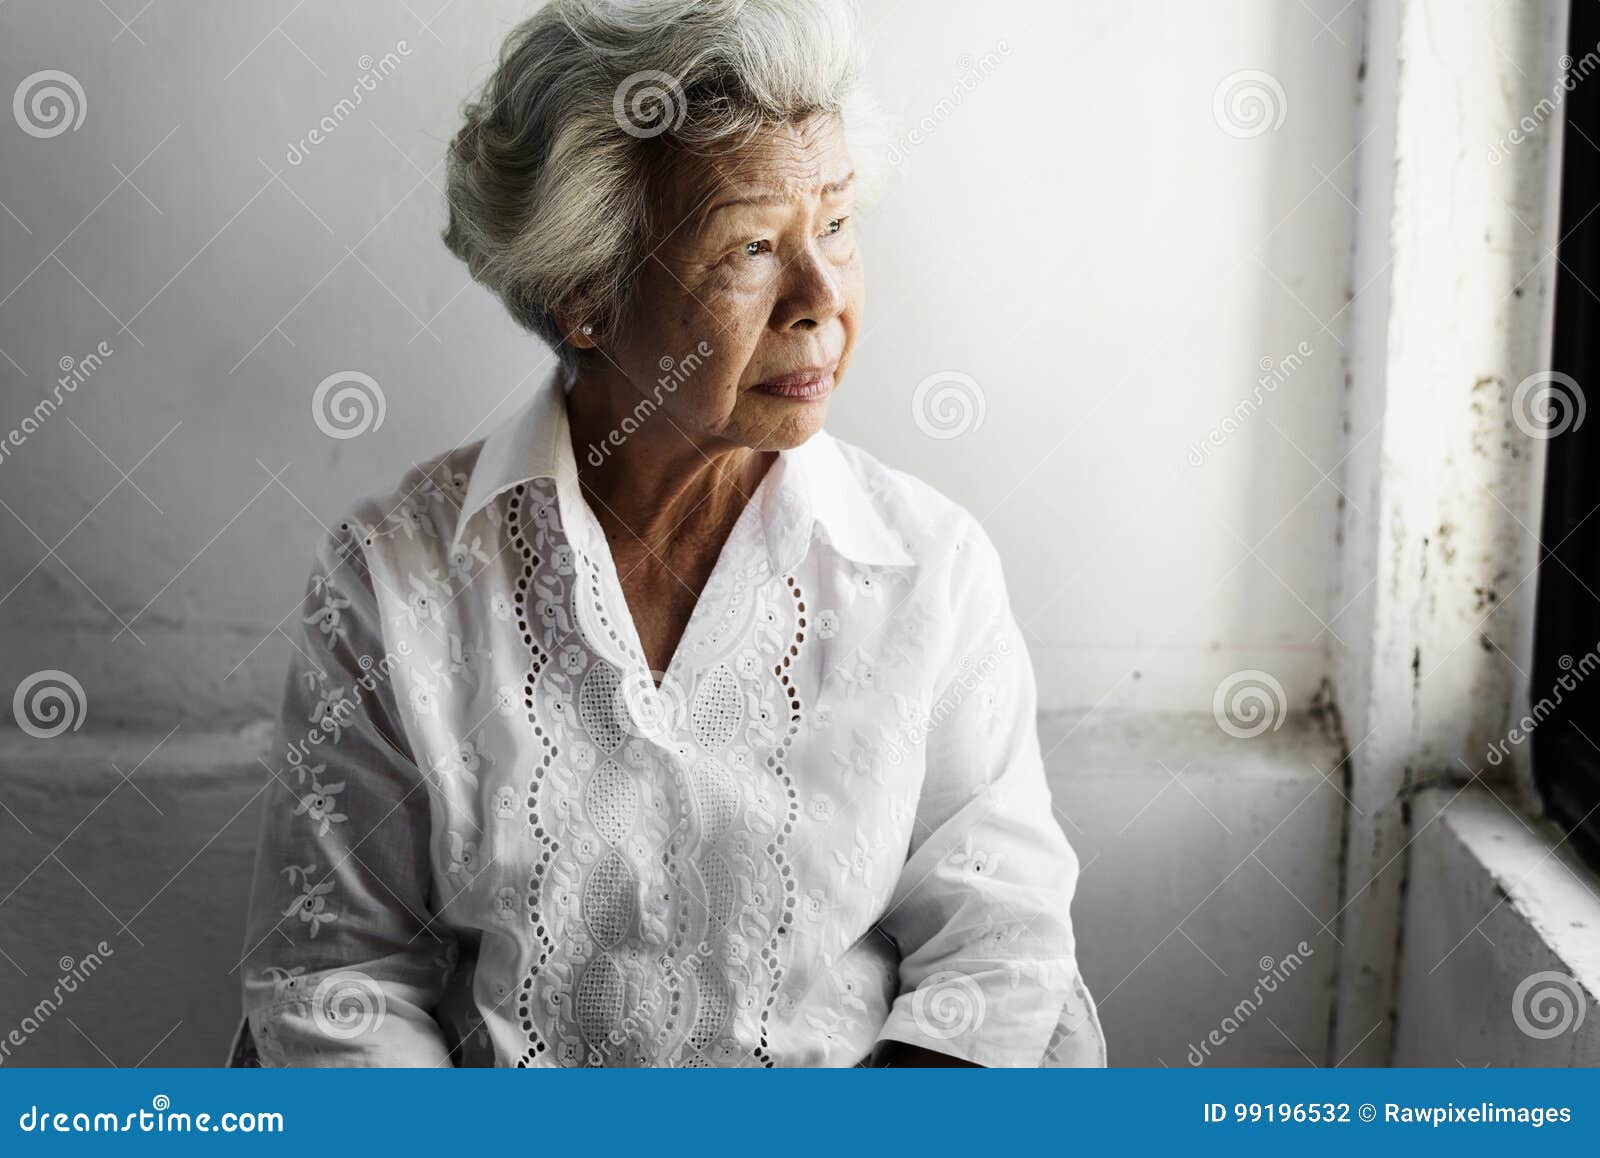 side view of elderly asian woman with thoughtful face expression